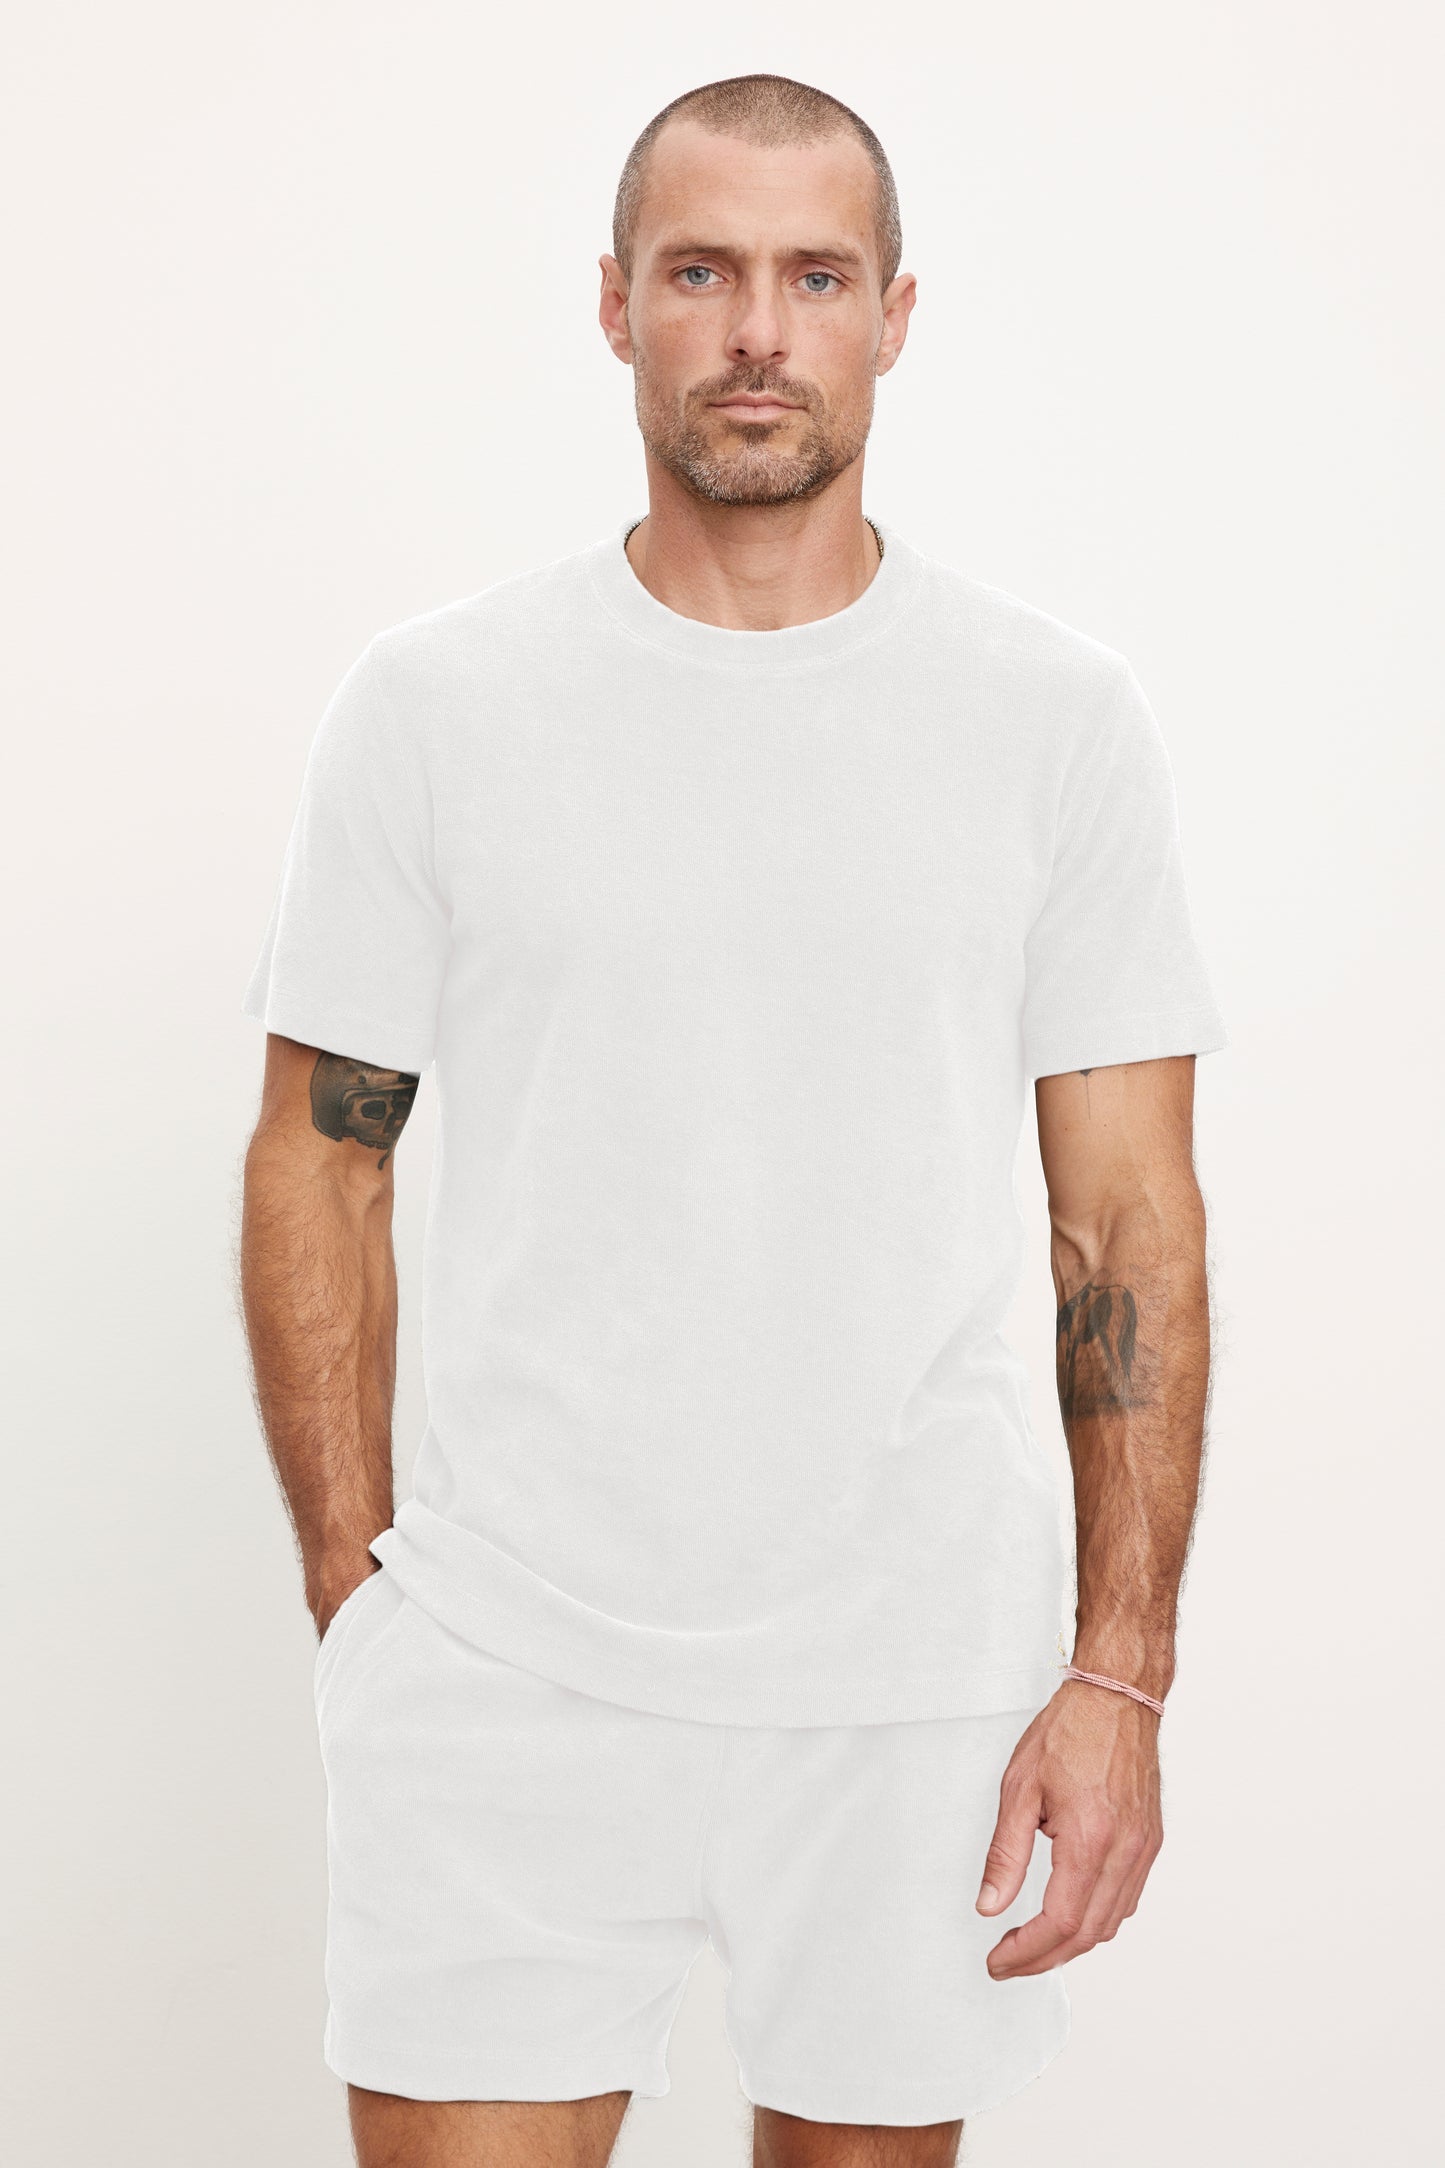 Man with light skin and shaved head wearing a white JAXON CREW t-shirt by Velvet by Graham & Spencer and shorts, standing against a plain background, with visible tattoos on his arms.-36891087732929